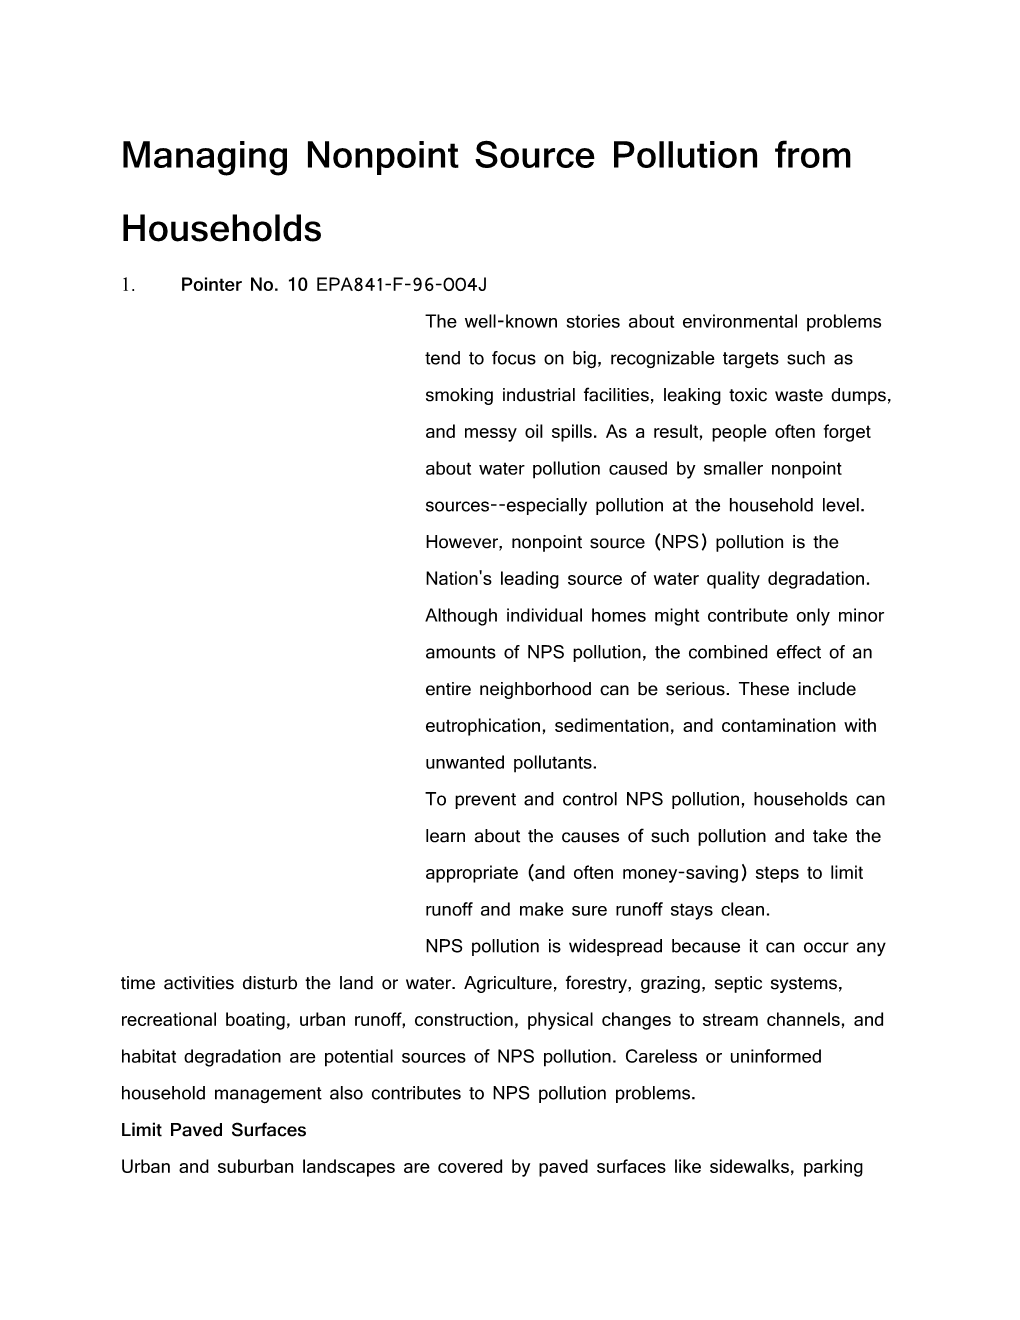 Managing Nonpoint Source Pollution from Households